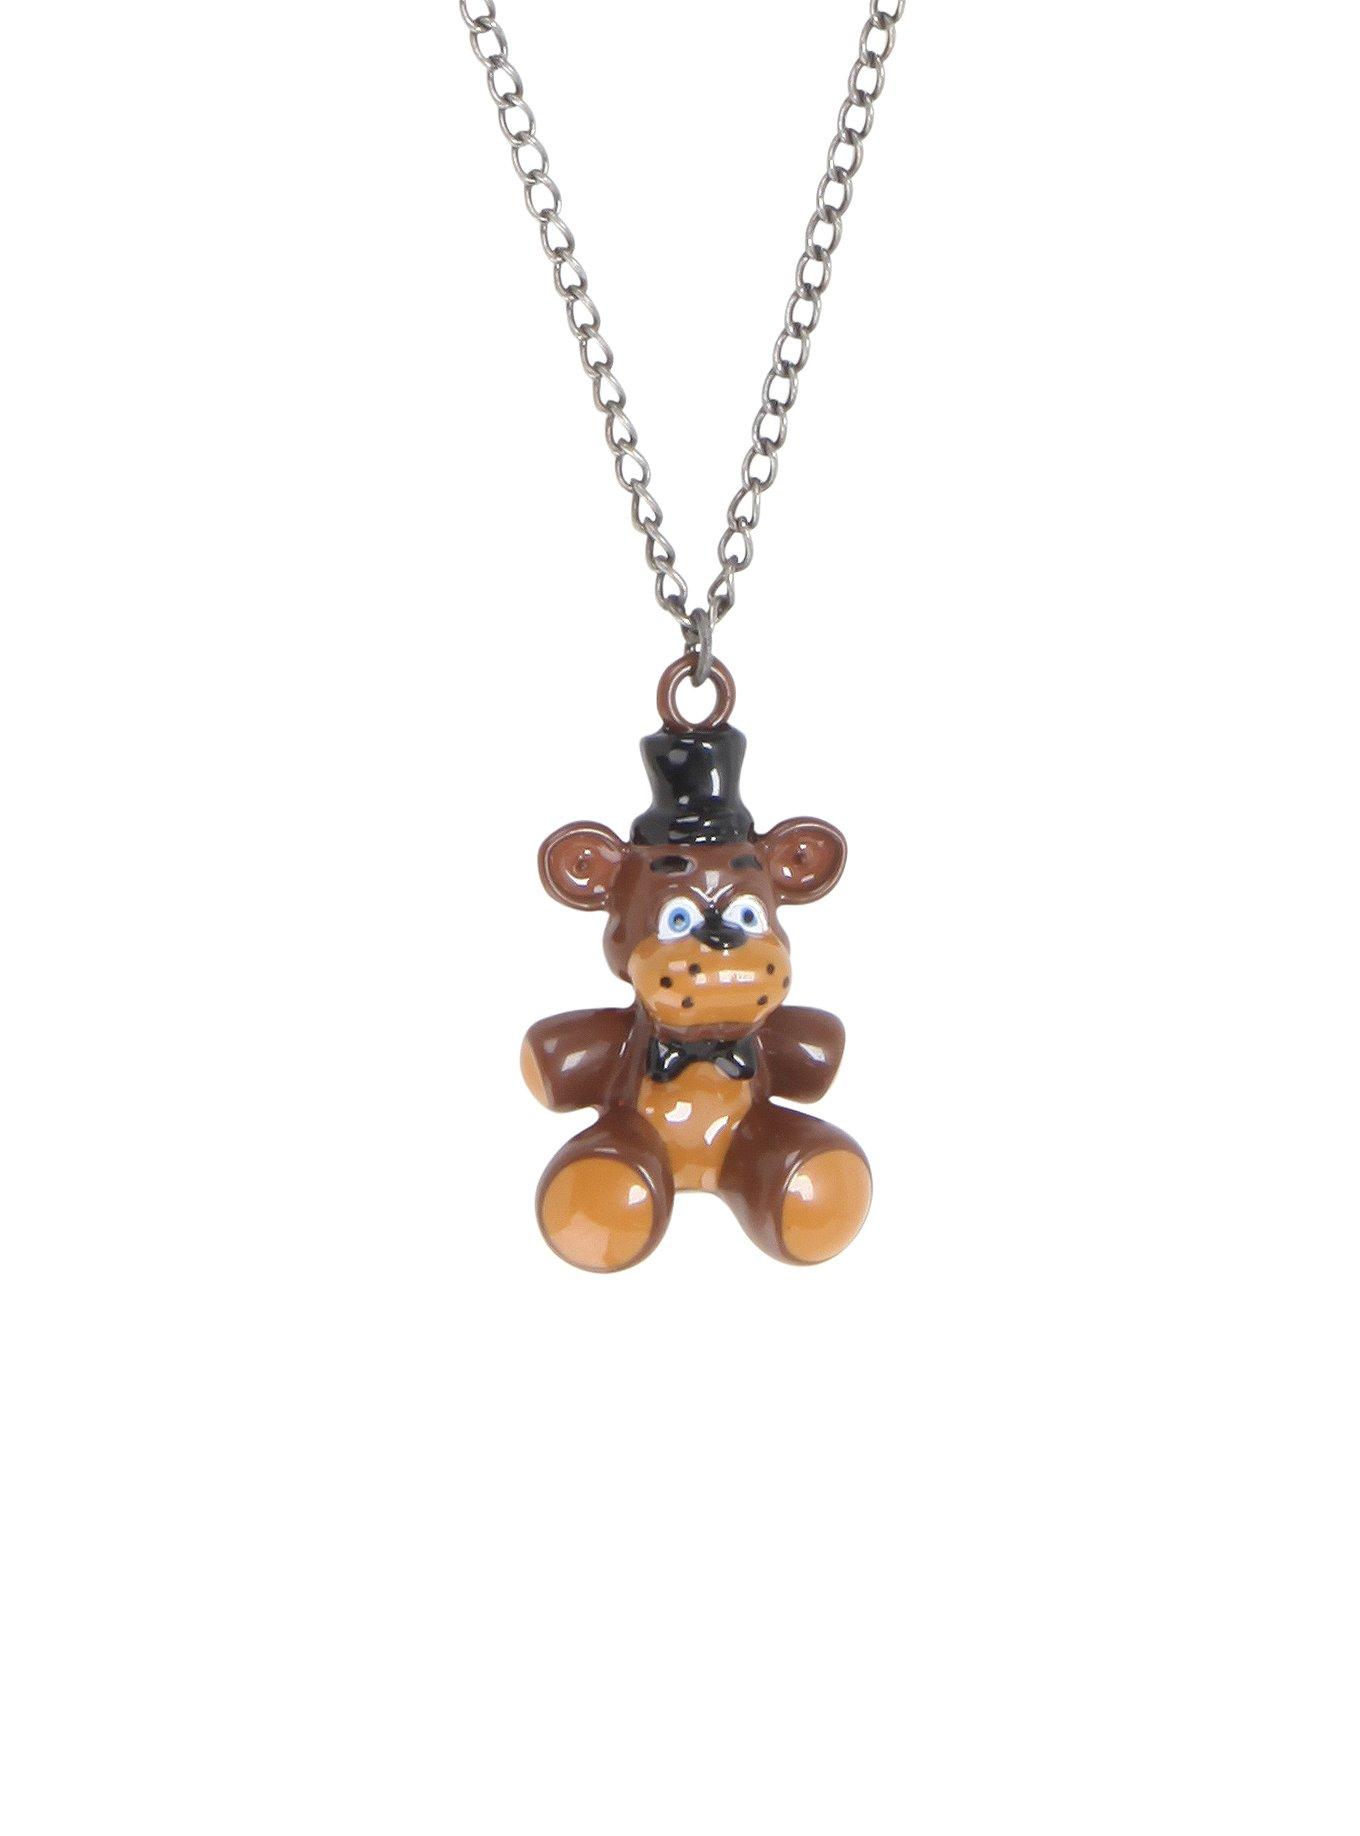 Five Nights at Freddy's Video Game Merchandise Necklaces for sale